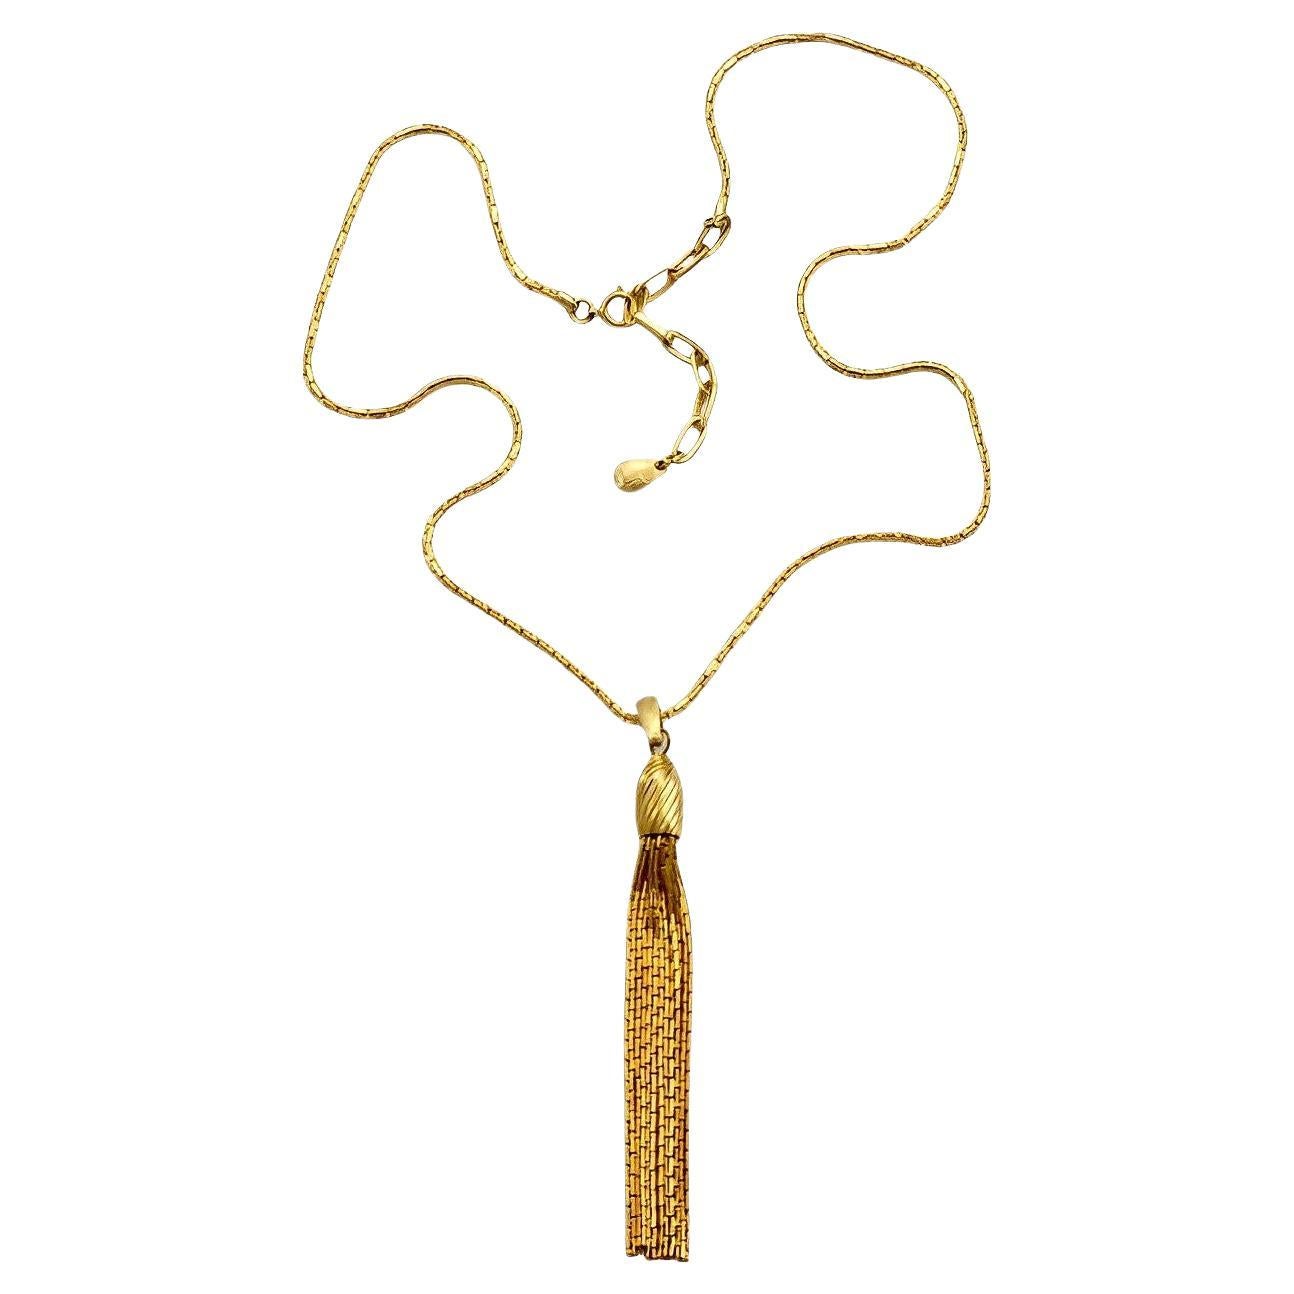 Gold Plated Elongated Box Chain Tassel Necklace circa 1980s